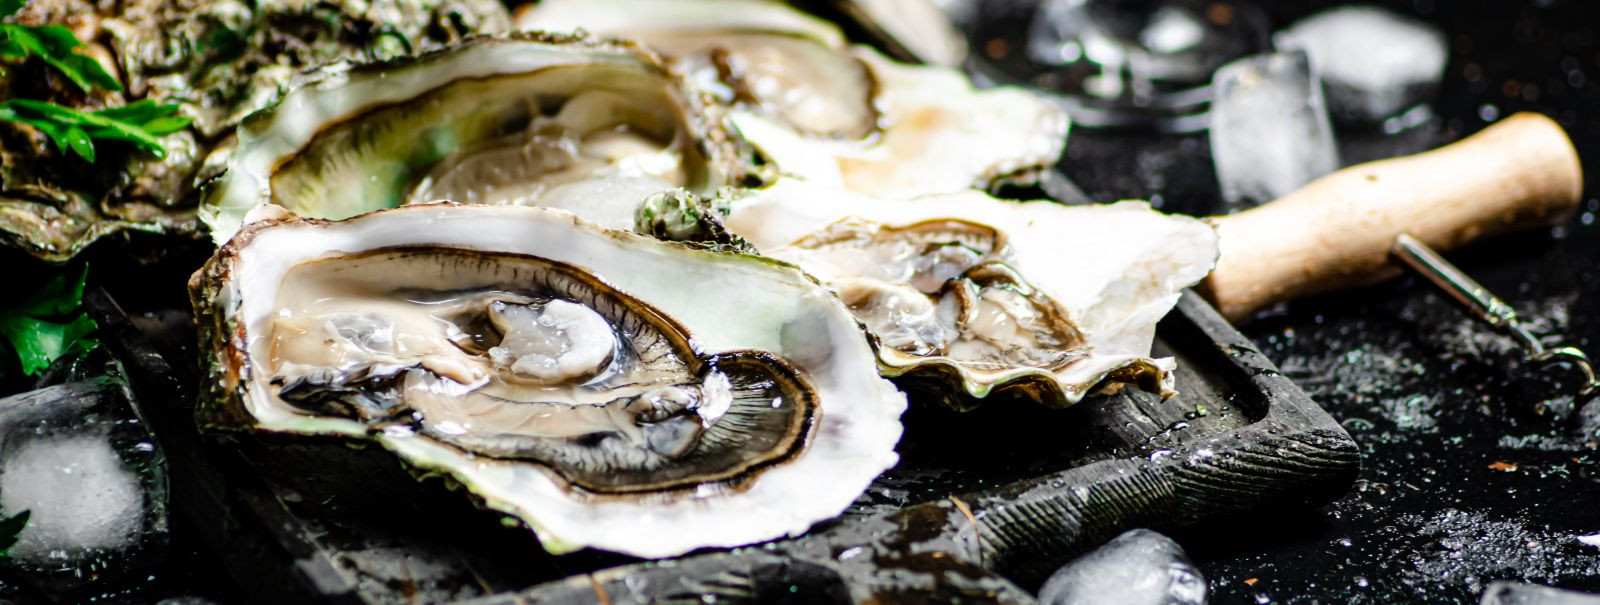 When it comes to hosting an unforgettable party, the devil is in the details, and nothing says sophistication quite like a platter of fresh oysters. These marin